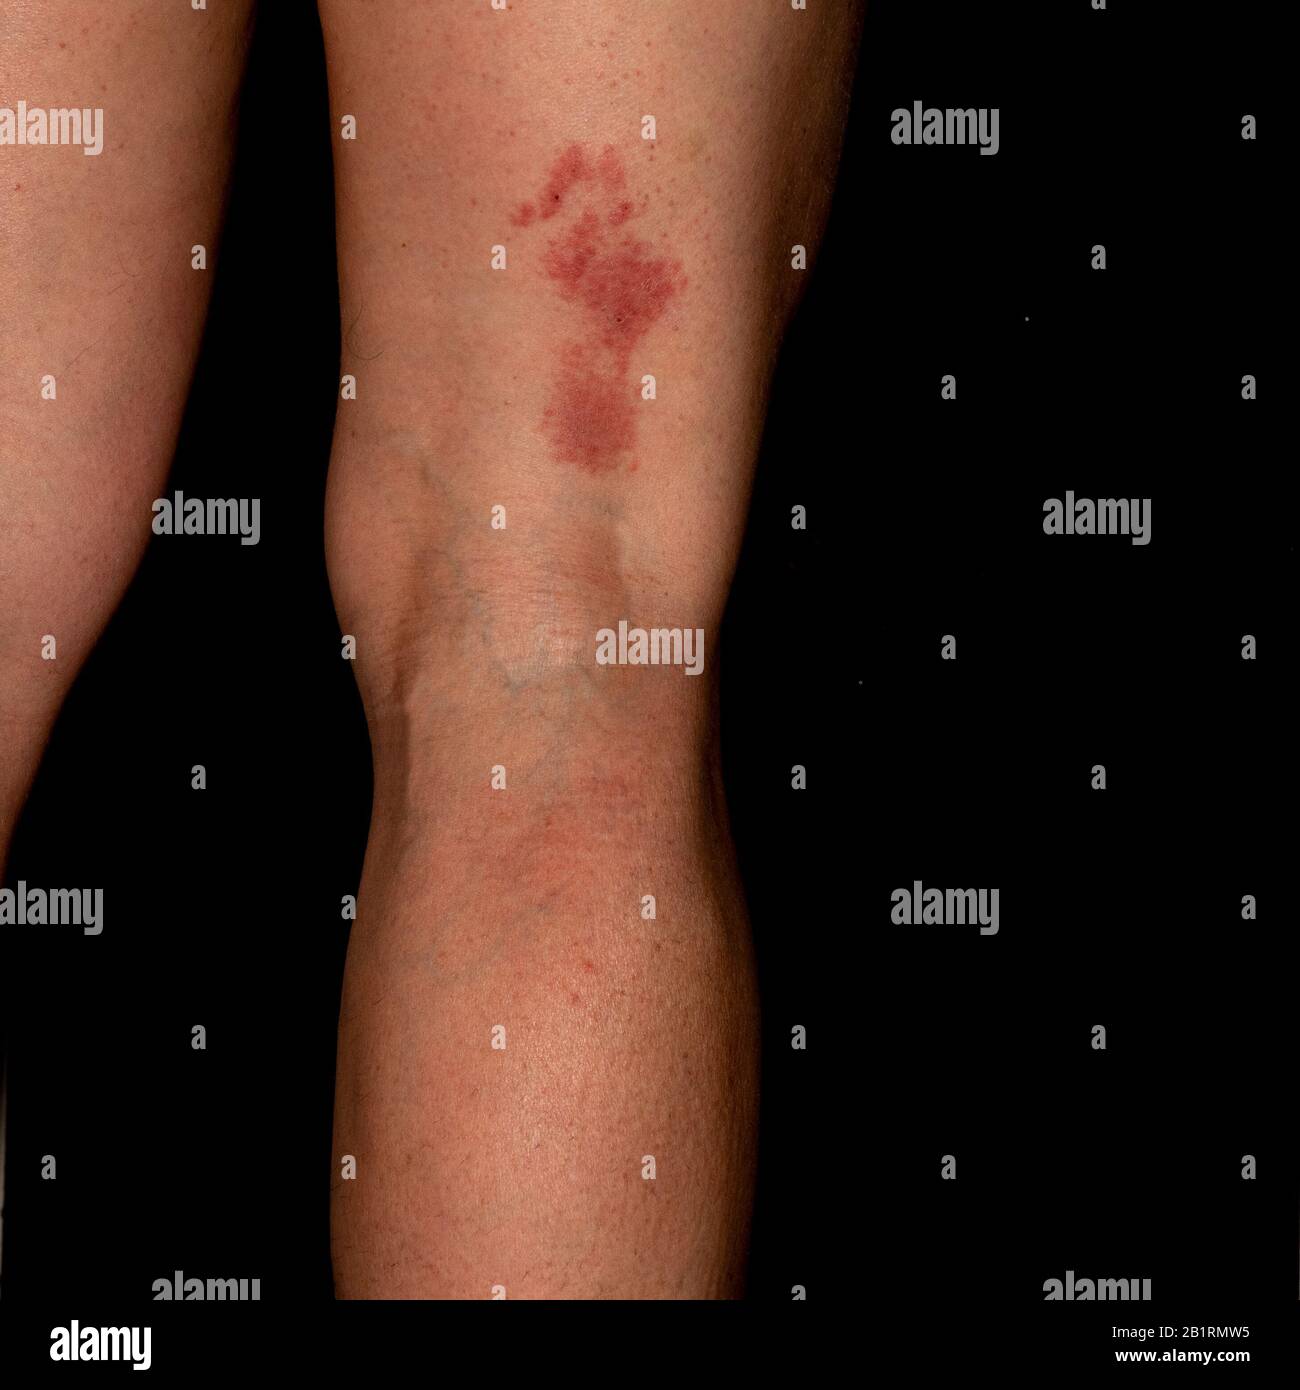 Herpes Zoster Shingles Stock Photos &  Herpes Zoster Shingles Stock ...